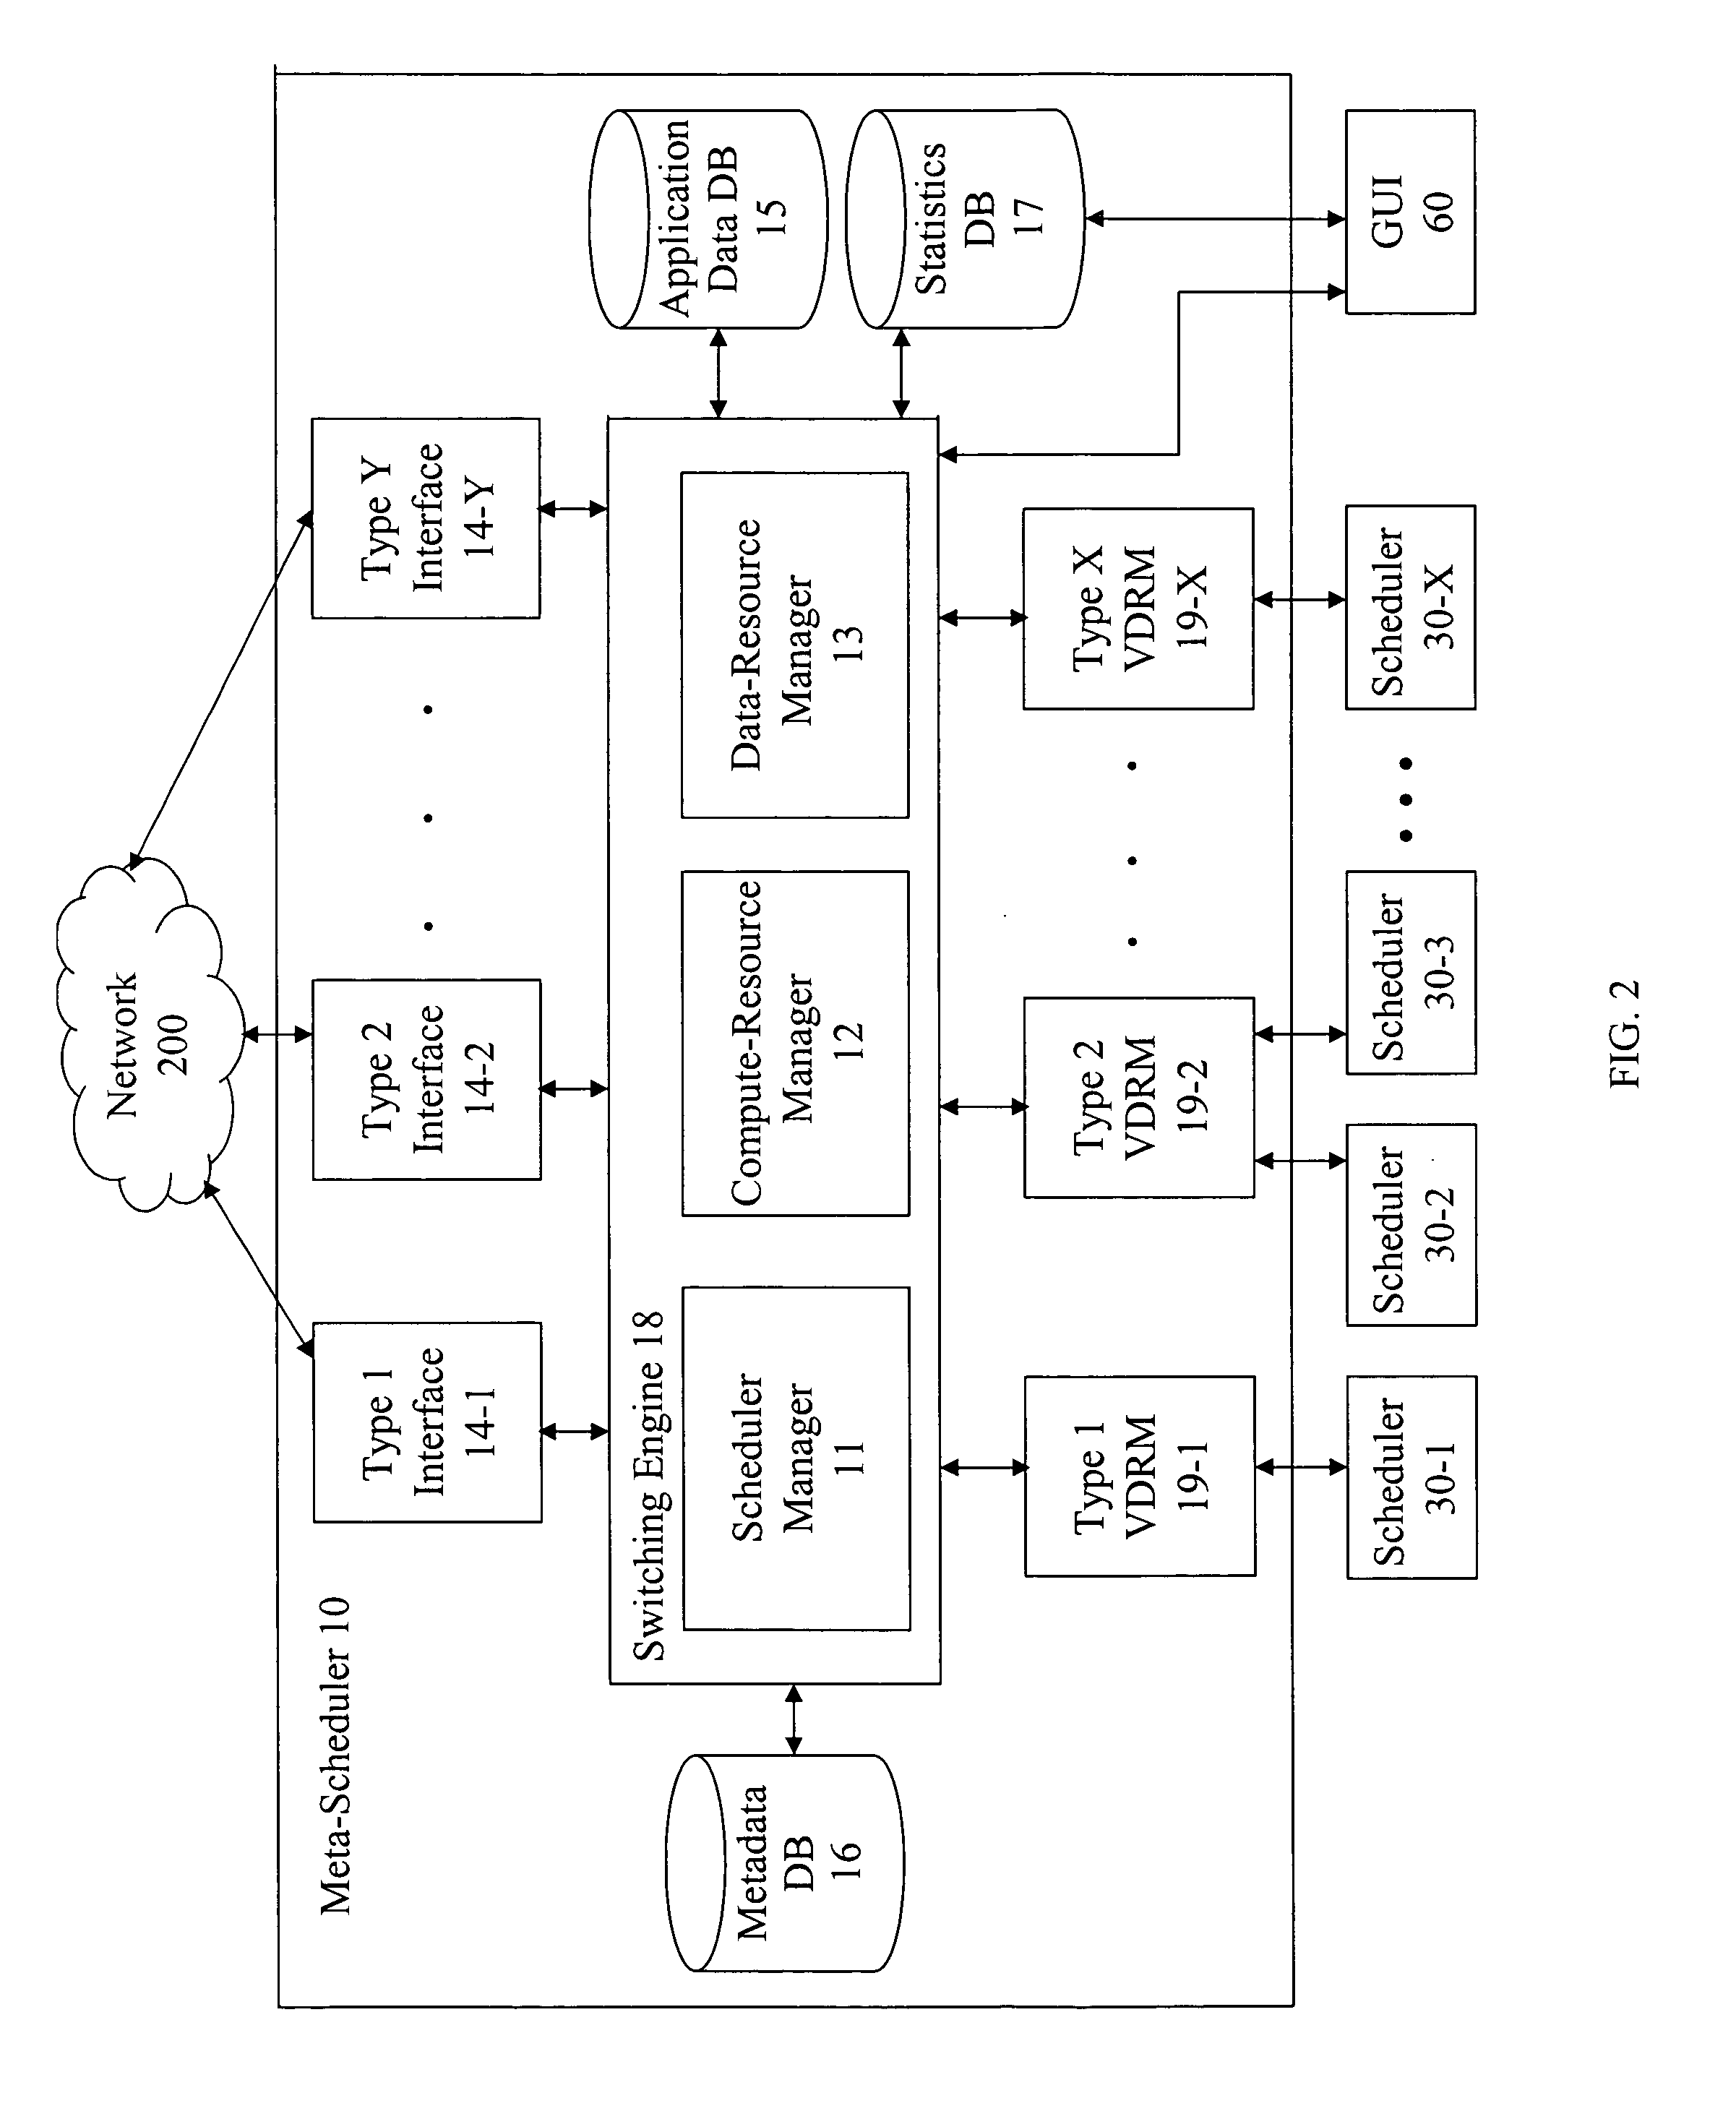 System and method for meta-scheduling